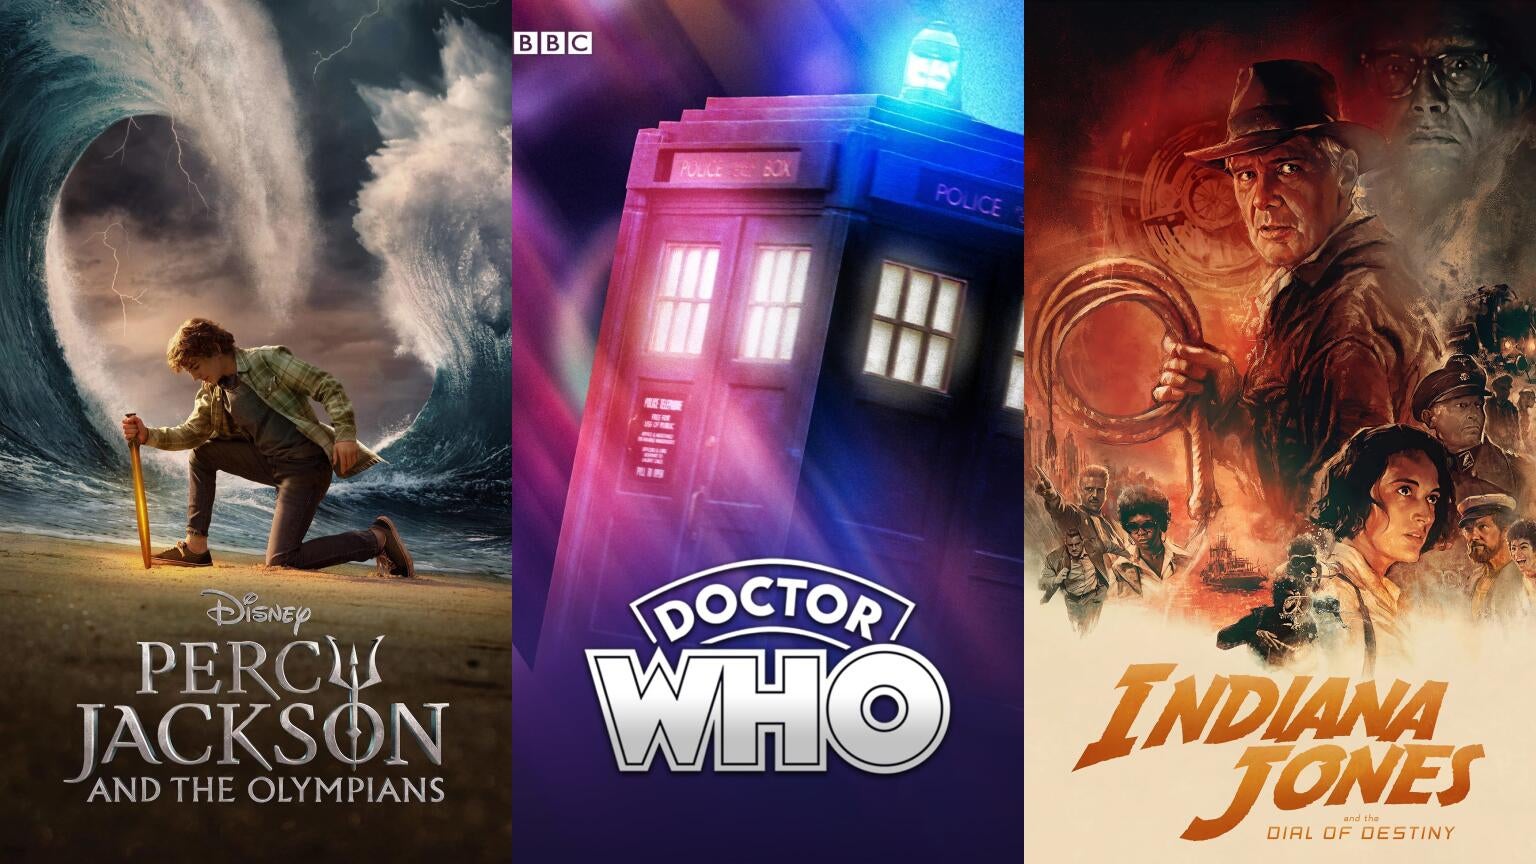 Trio of posters for "Percy Jackson and the Olympians," "Doctor Who," and "Indiana Jones and the Dial of Destiny"